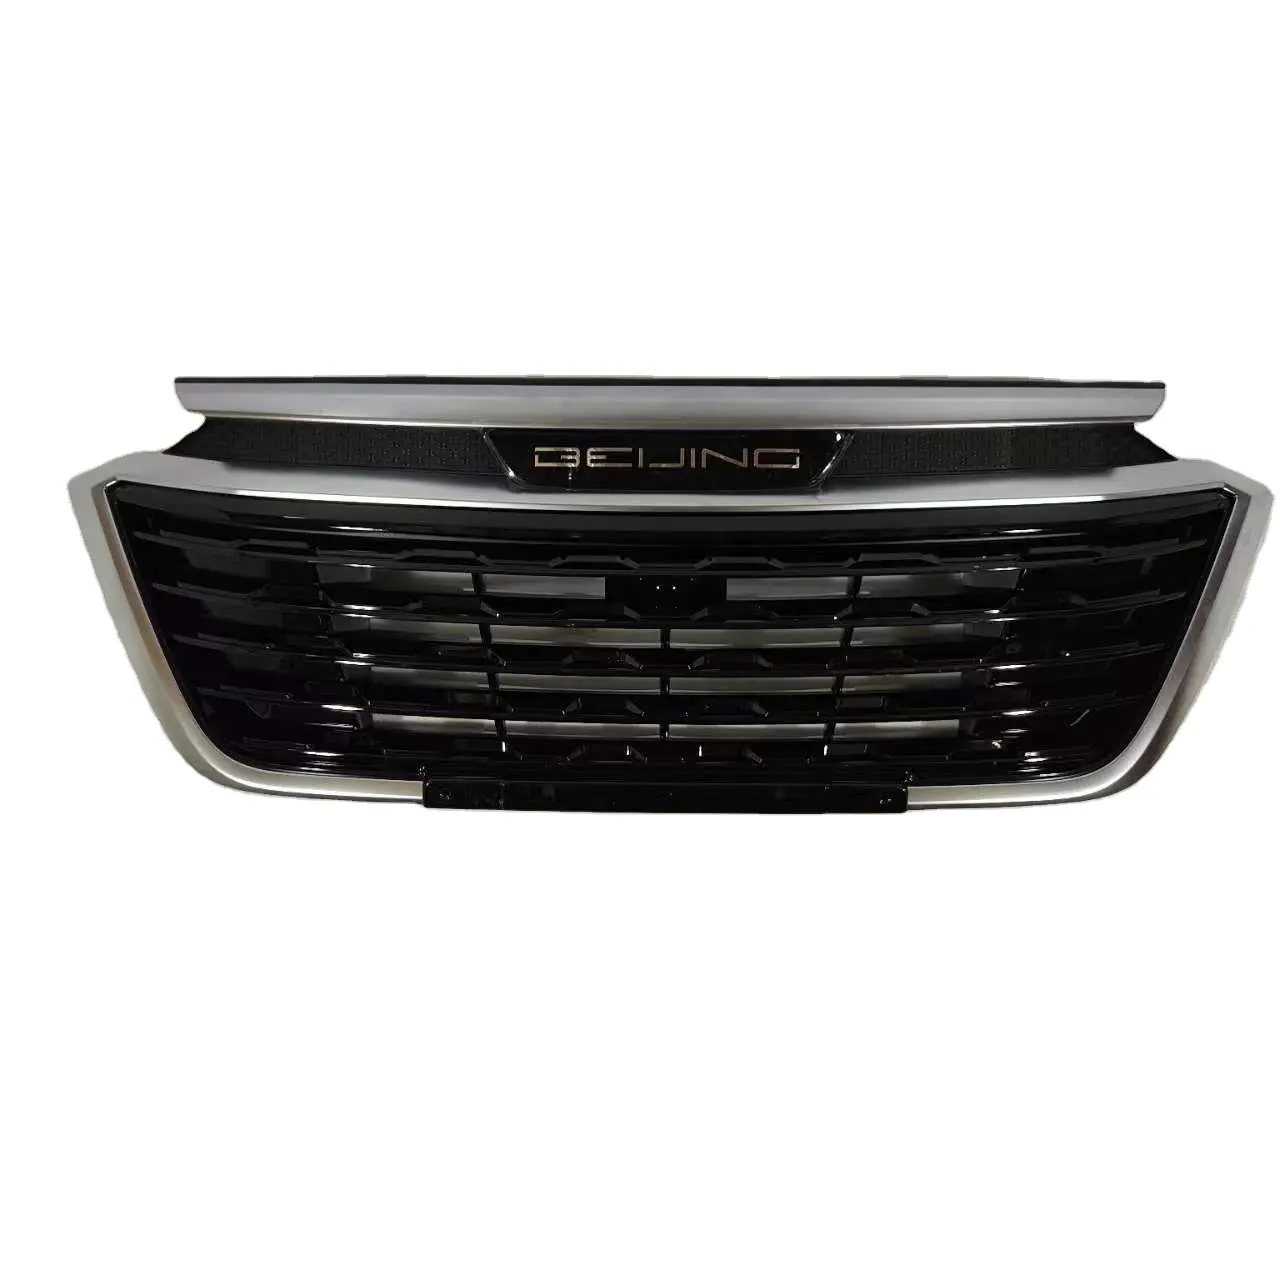 OE A00 098 443  wholesale of high-quality auto parts  applicable to the car grille of BAIC x3